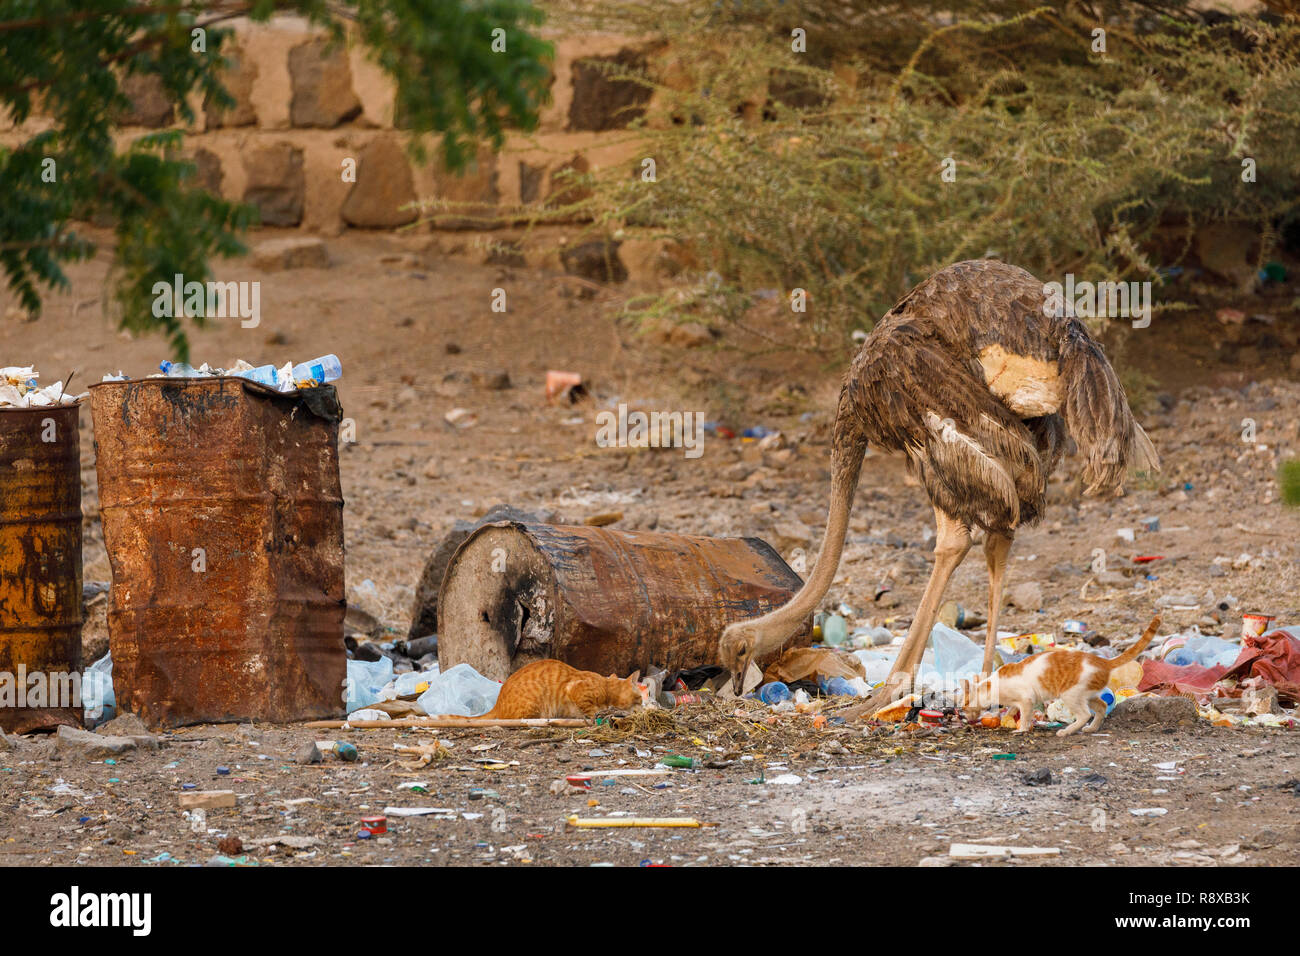 Common ostrich (Struthio camelus) and cats eating garbage. Ethiopia. Africa Stock Photo